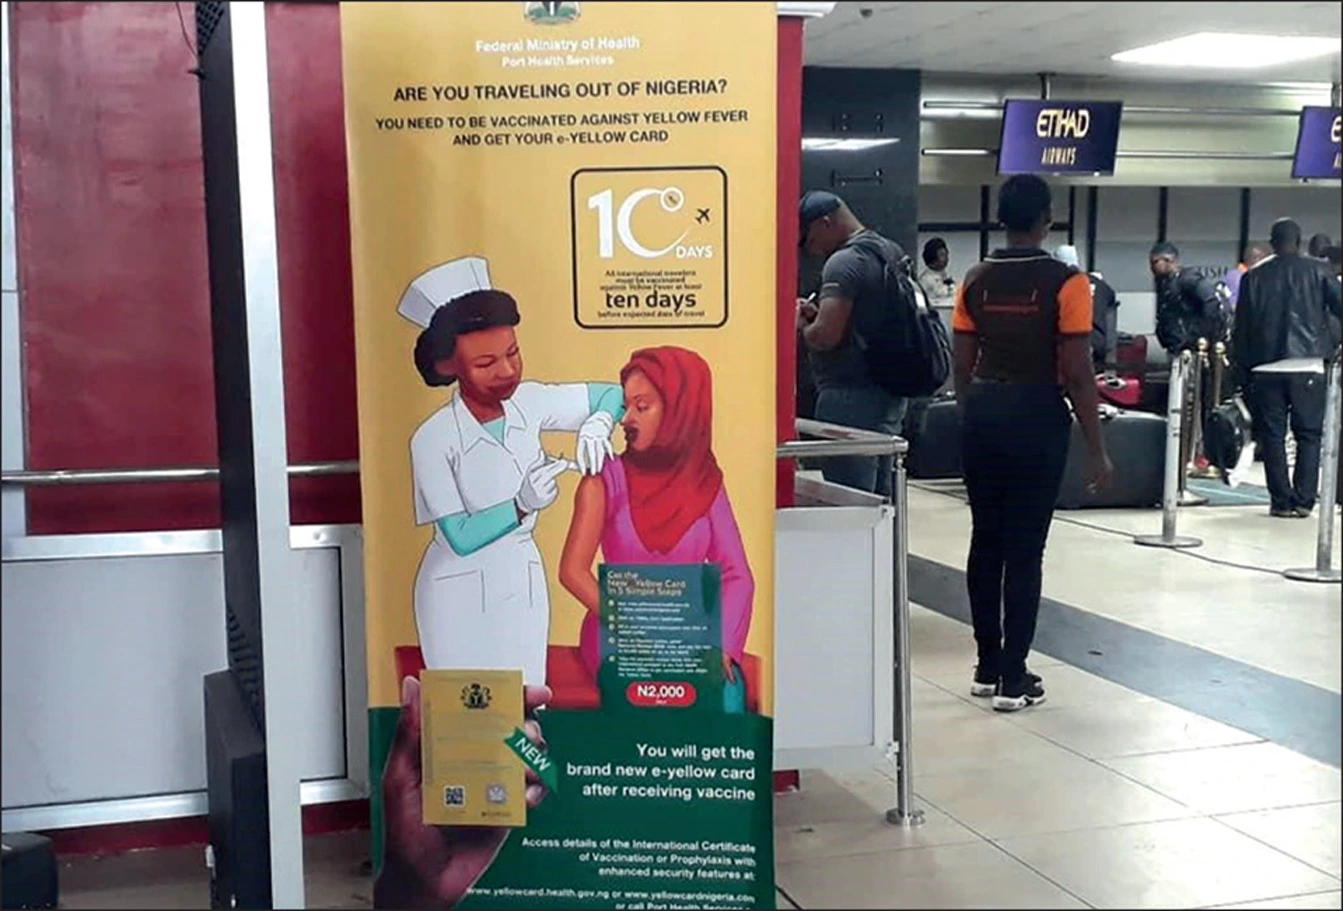 Travelling in Kenya from the UK - AN e-Yellow card is mandatory for travellers visiting Kenya. It is issued to all travellers in Kenya vaccinated against yellow fever.